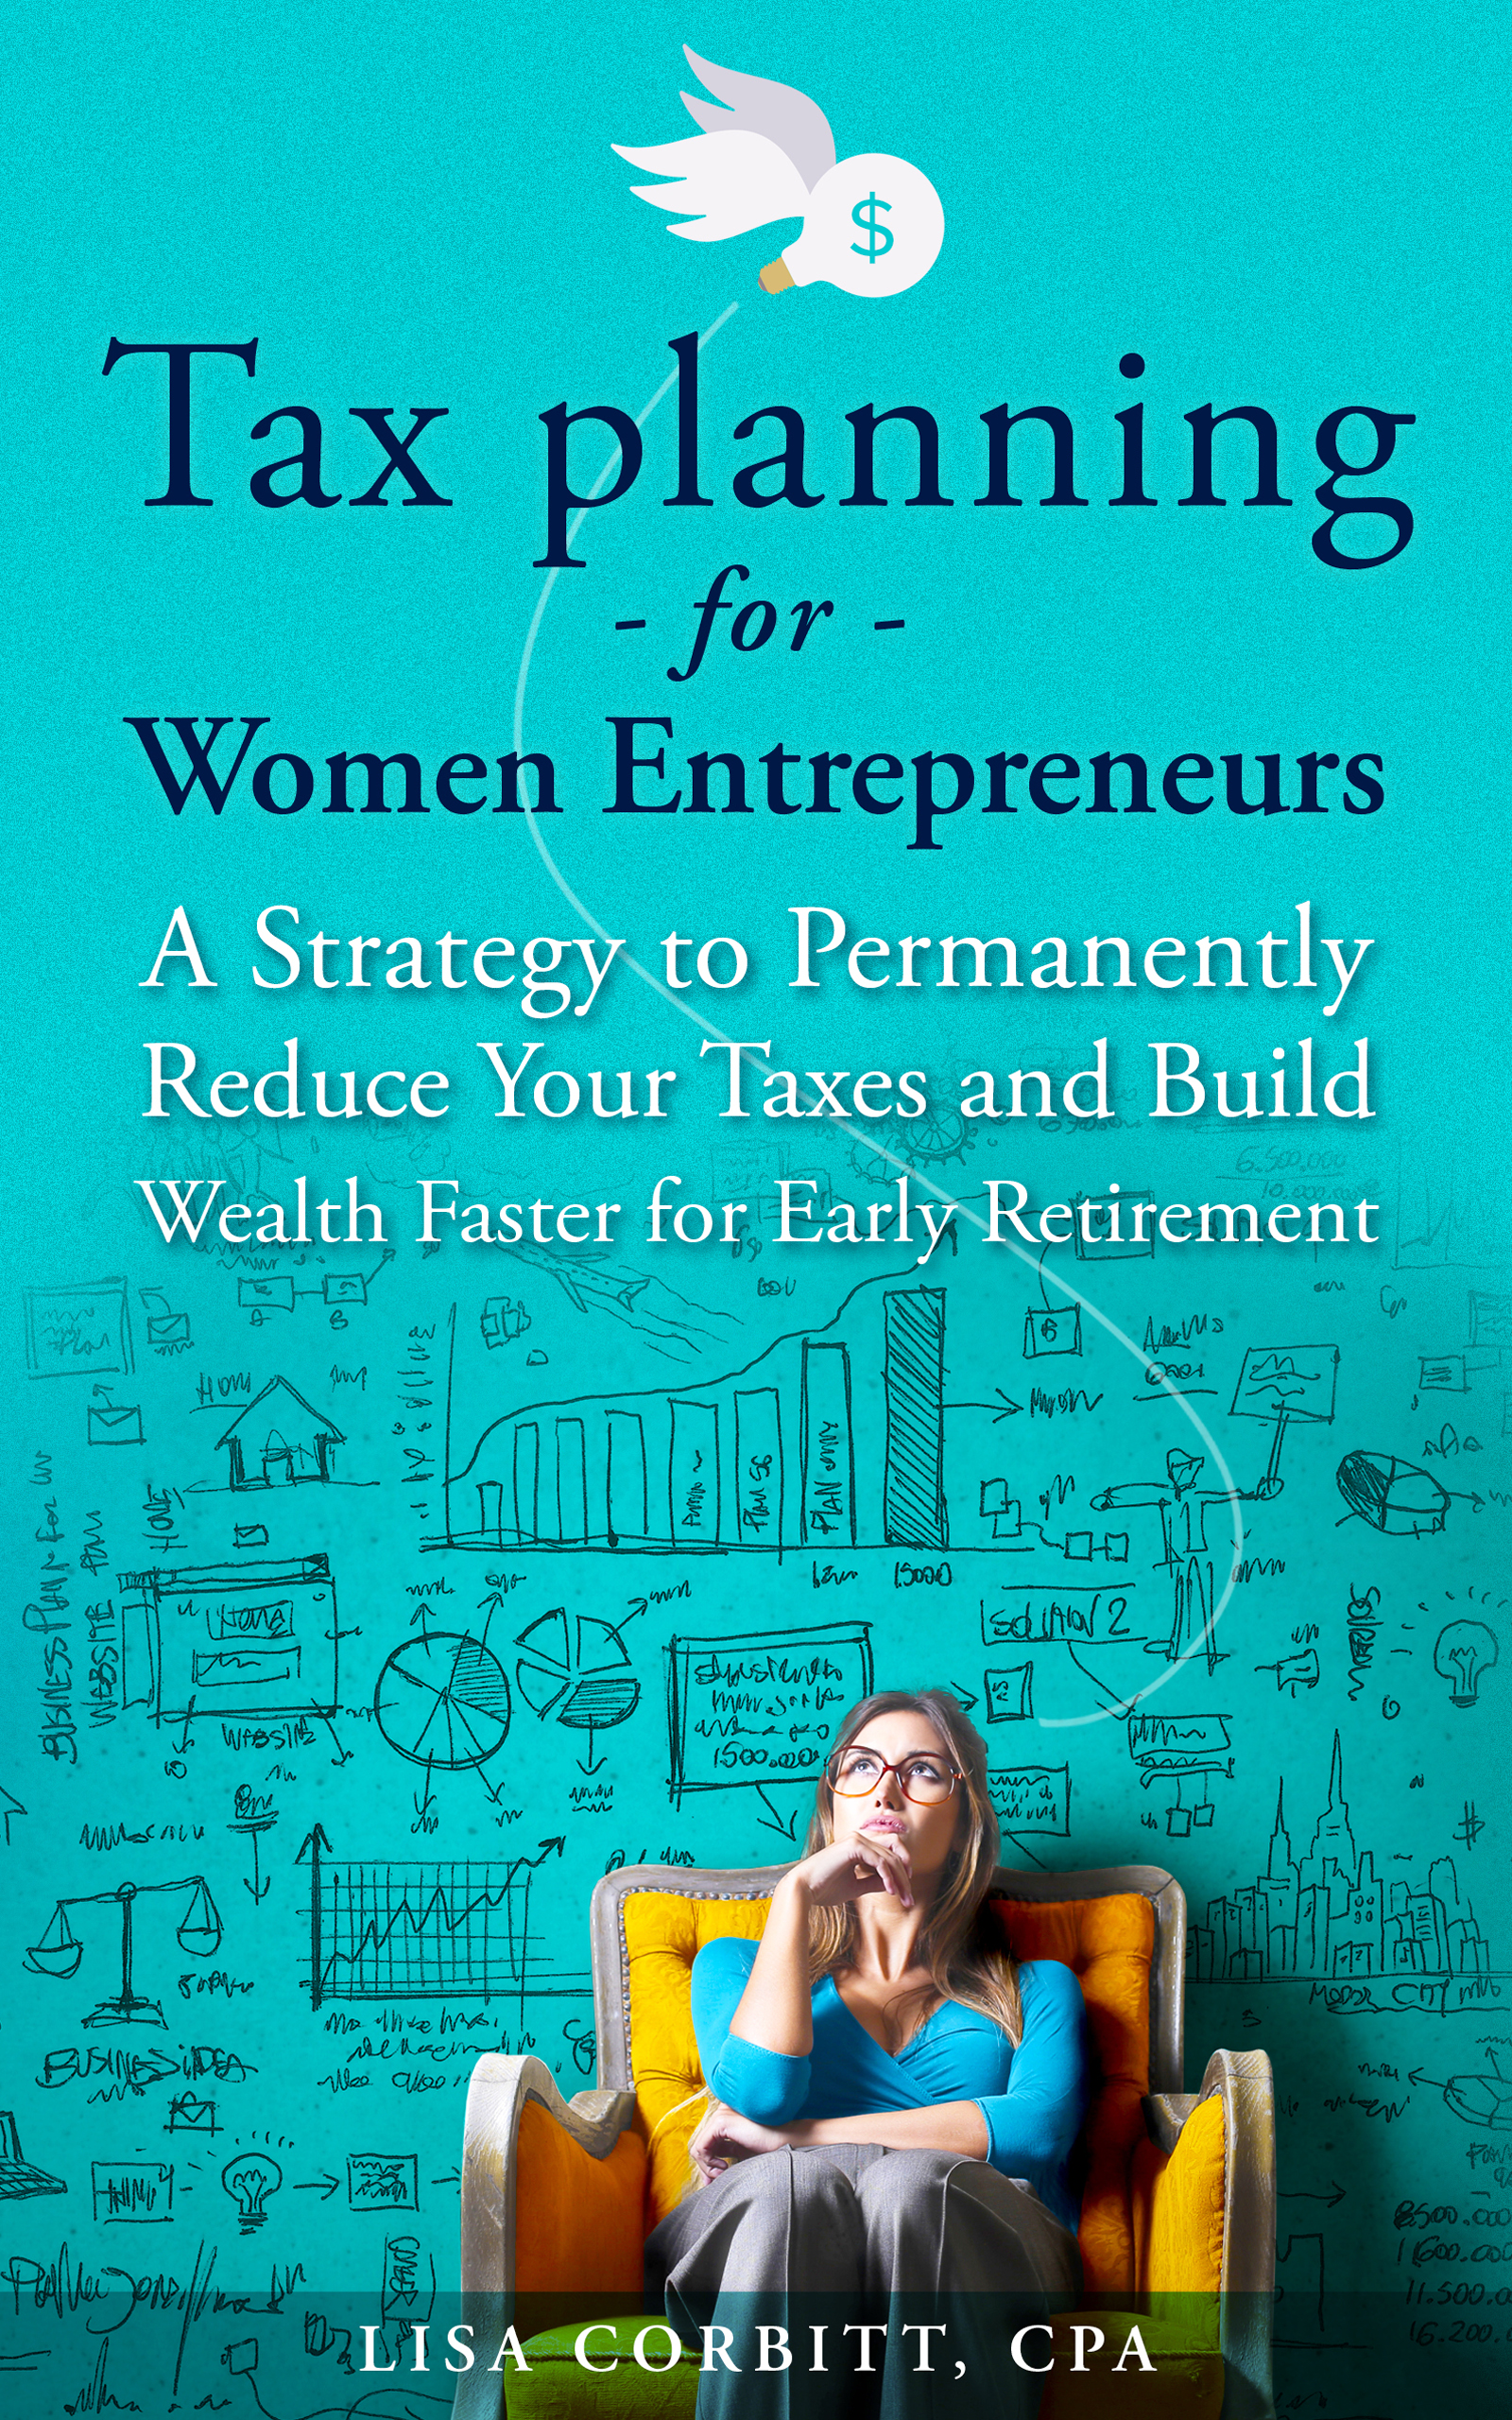 FREE: Tax Planning For Women Entrepreneurs: A Strategy to Permanently Reduce Your Taxes and Build Wealth Faster for Early Retirement by Lisa Corbitt